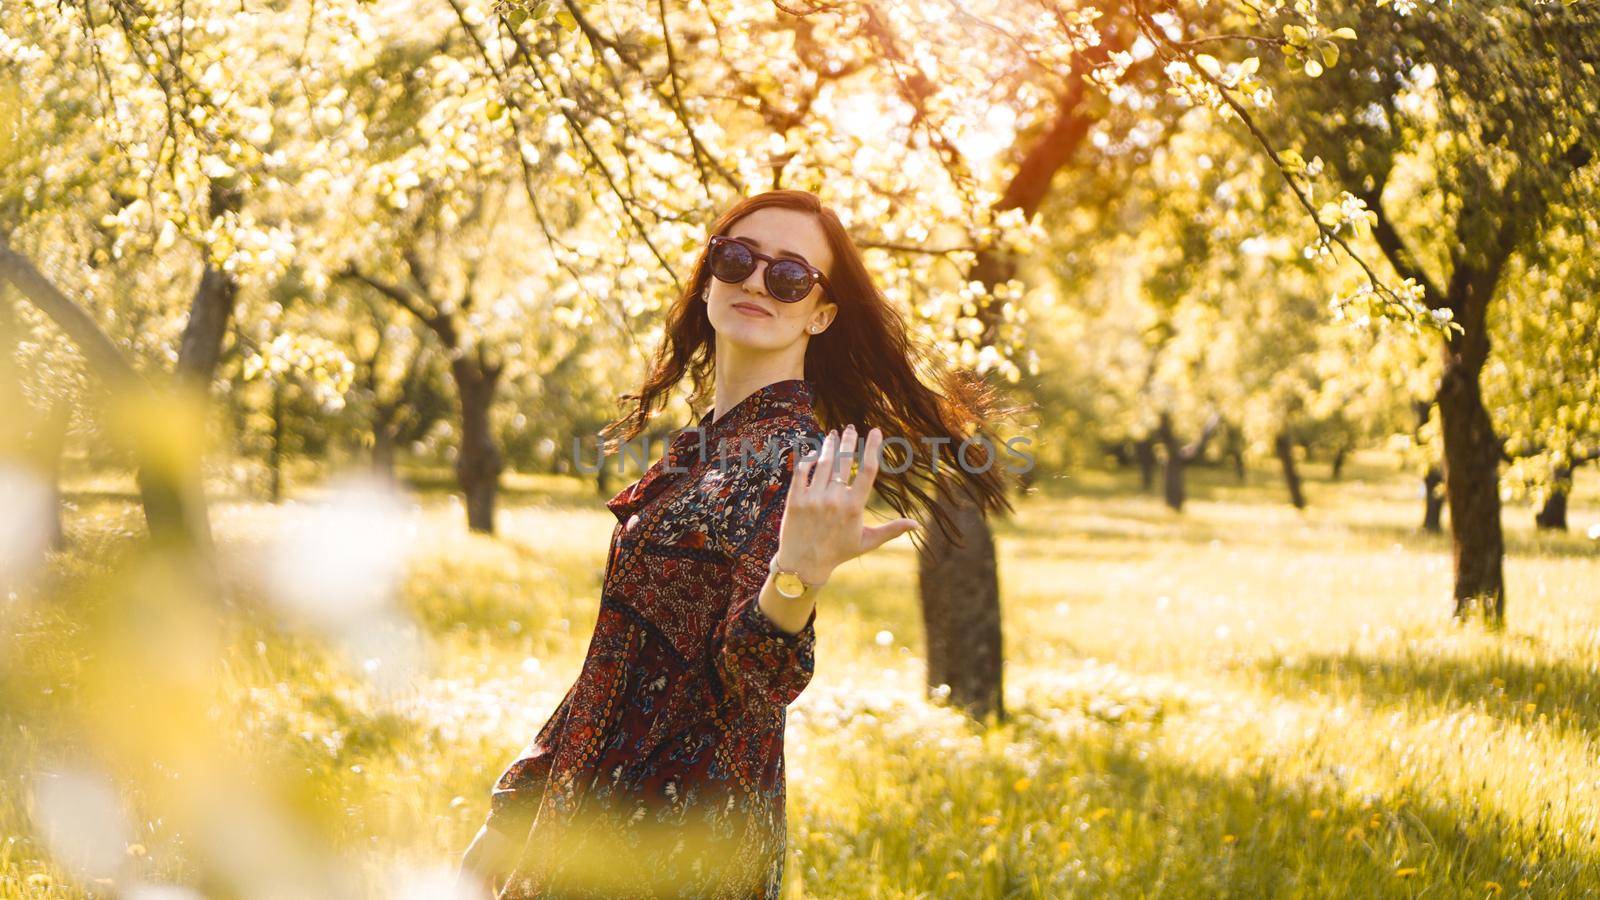 Smiling summer woman with sunglasses. Beautiful Young Woman Outdoor. Enjoy Nature. Healthy Smiling Girl in the Spring Park. Sunny day